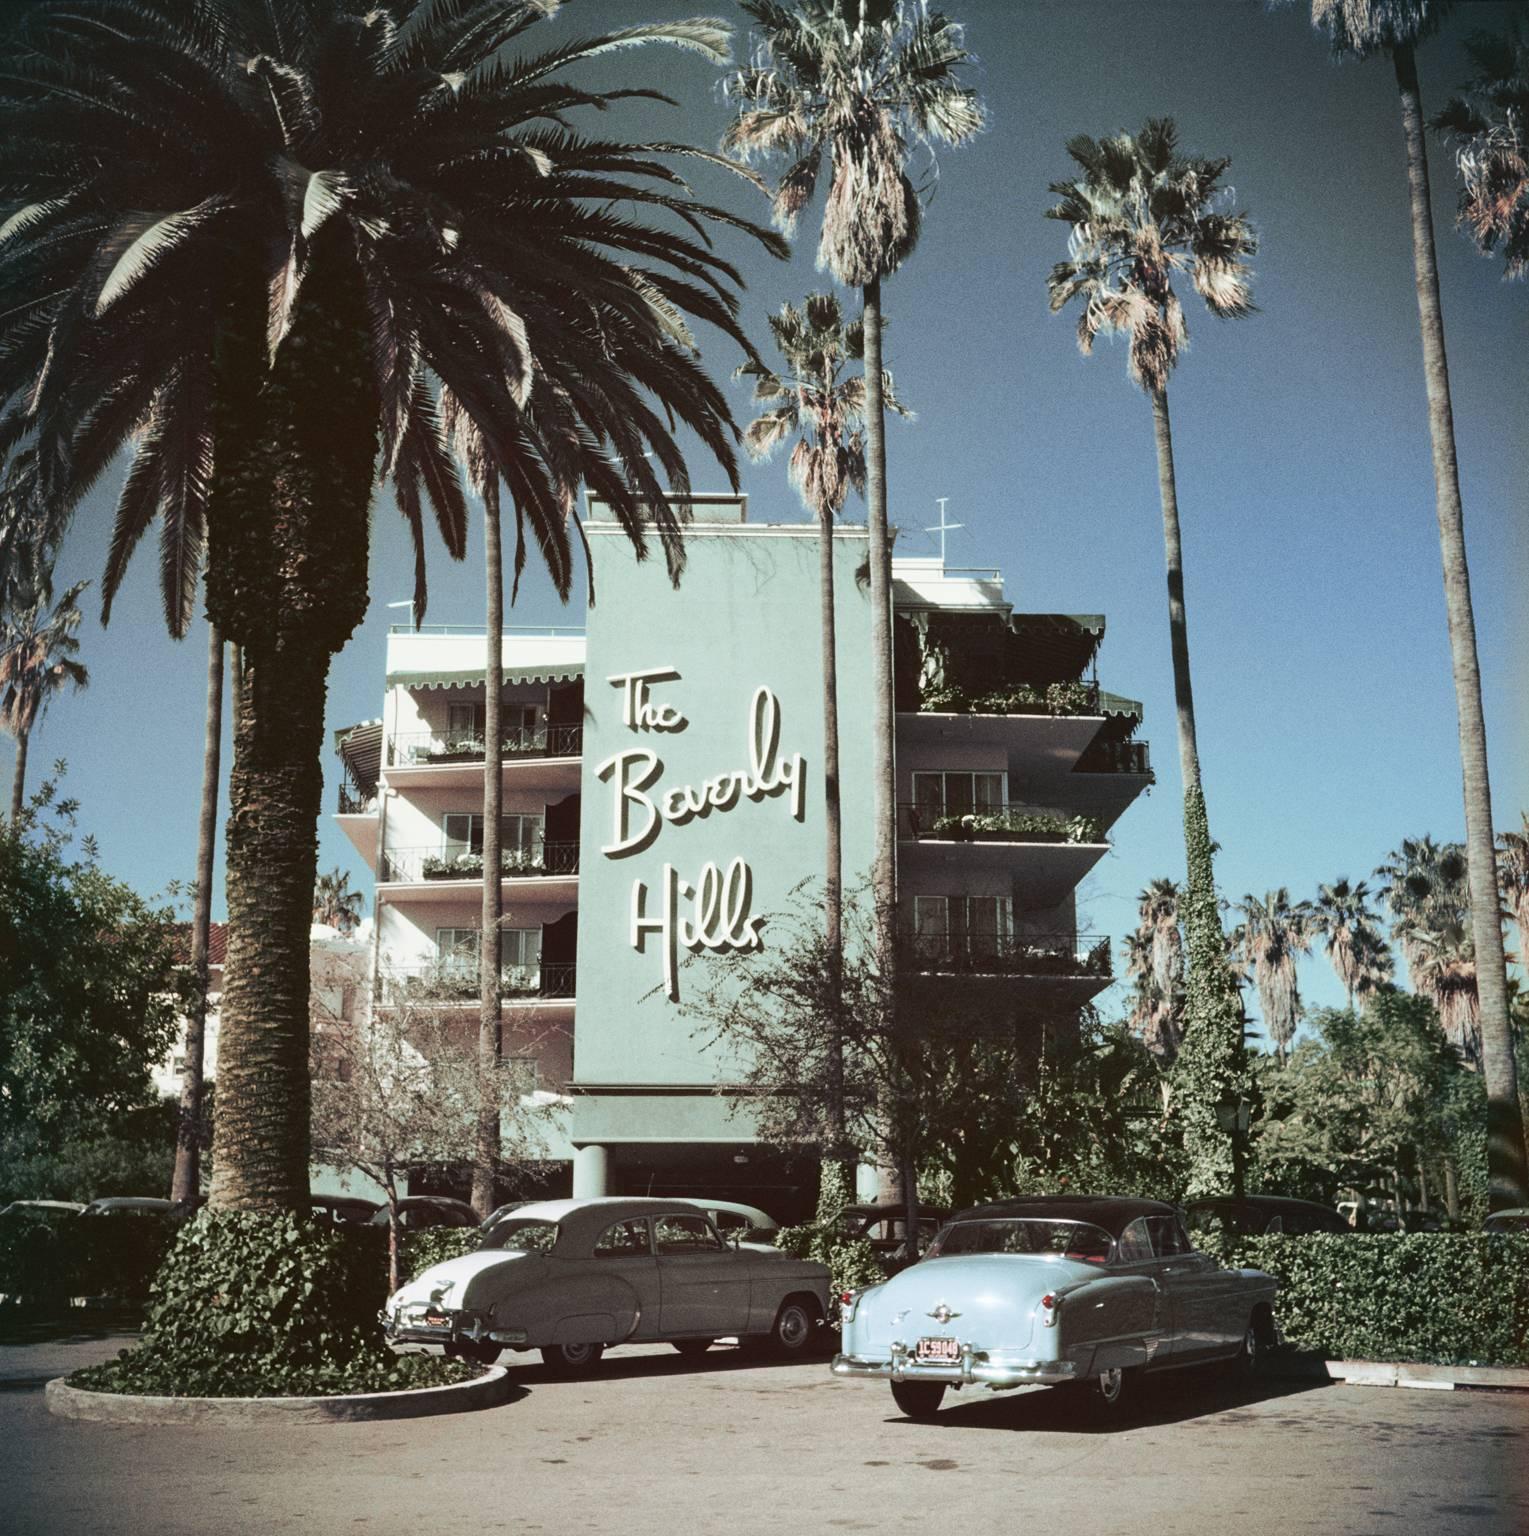 Beverly Hills Hotel by Slim Aarons

Beautiful 1950's cars parked outside the iconic Beverly Hills Hotel on Sunset Boulevard in California, 1957. 

Typically 'Slim' this photograph epitomises elegant travel and the vintage style and glamour of the